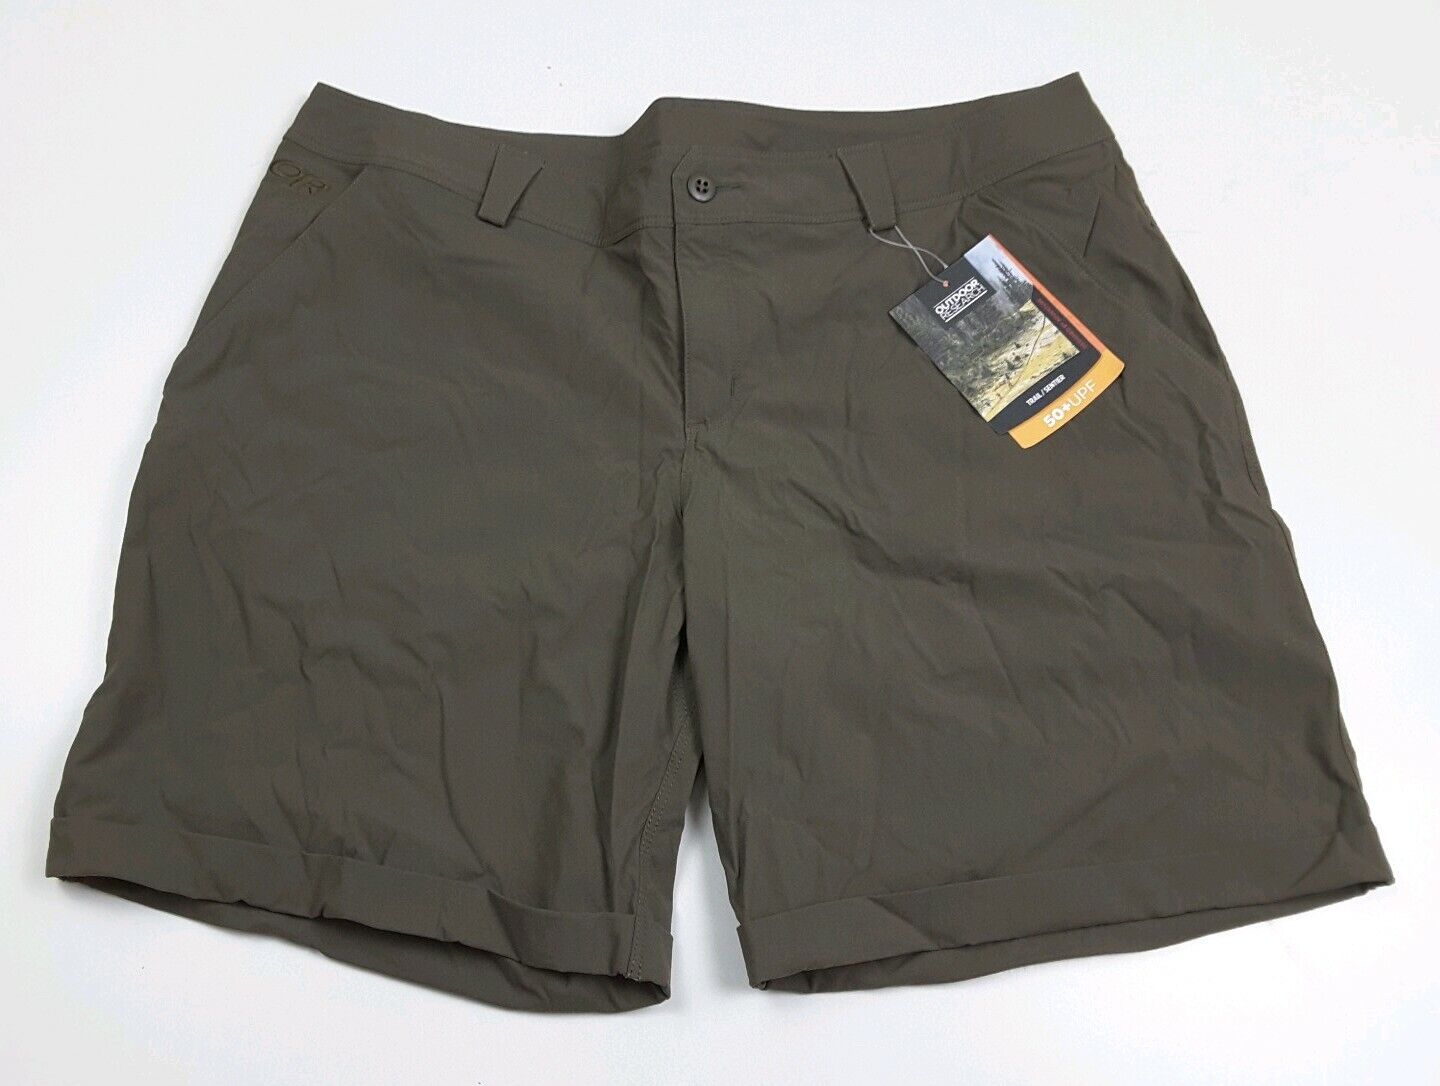 Outdoor Research Women#039;s Equinox Shorts Cheap sale Max 73% OFF Metro Size Mushroom